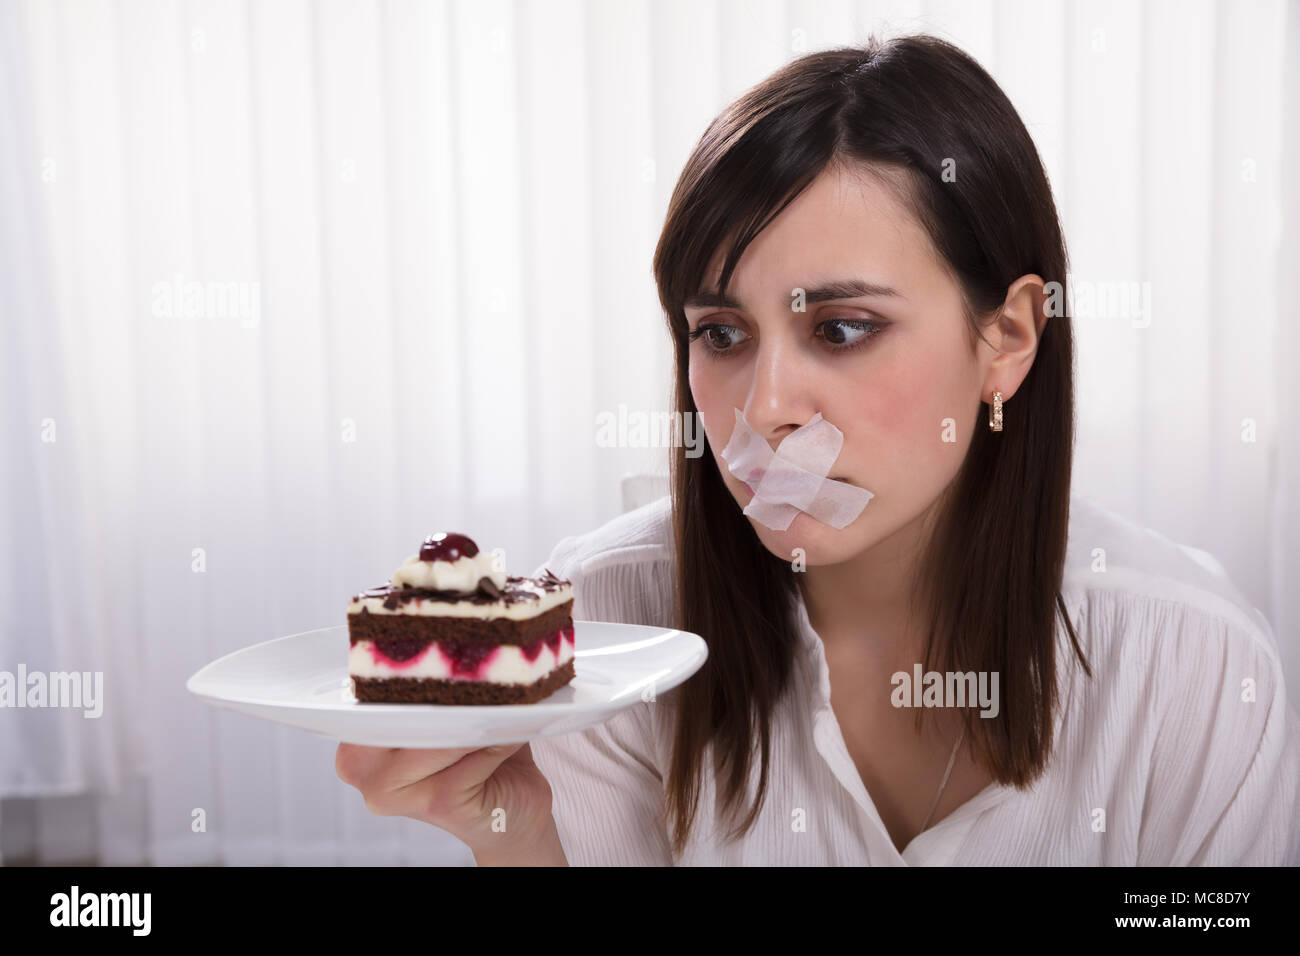 Woman With Four Arms Holding Fruit And Cakes In Each Hand Stock Photo,  Picture and Royalty Free Image. Image 28128855.